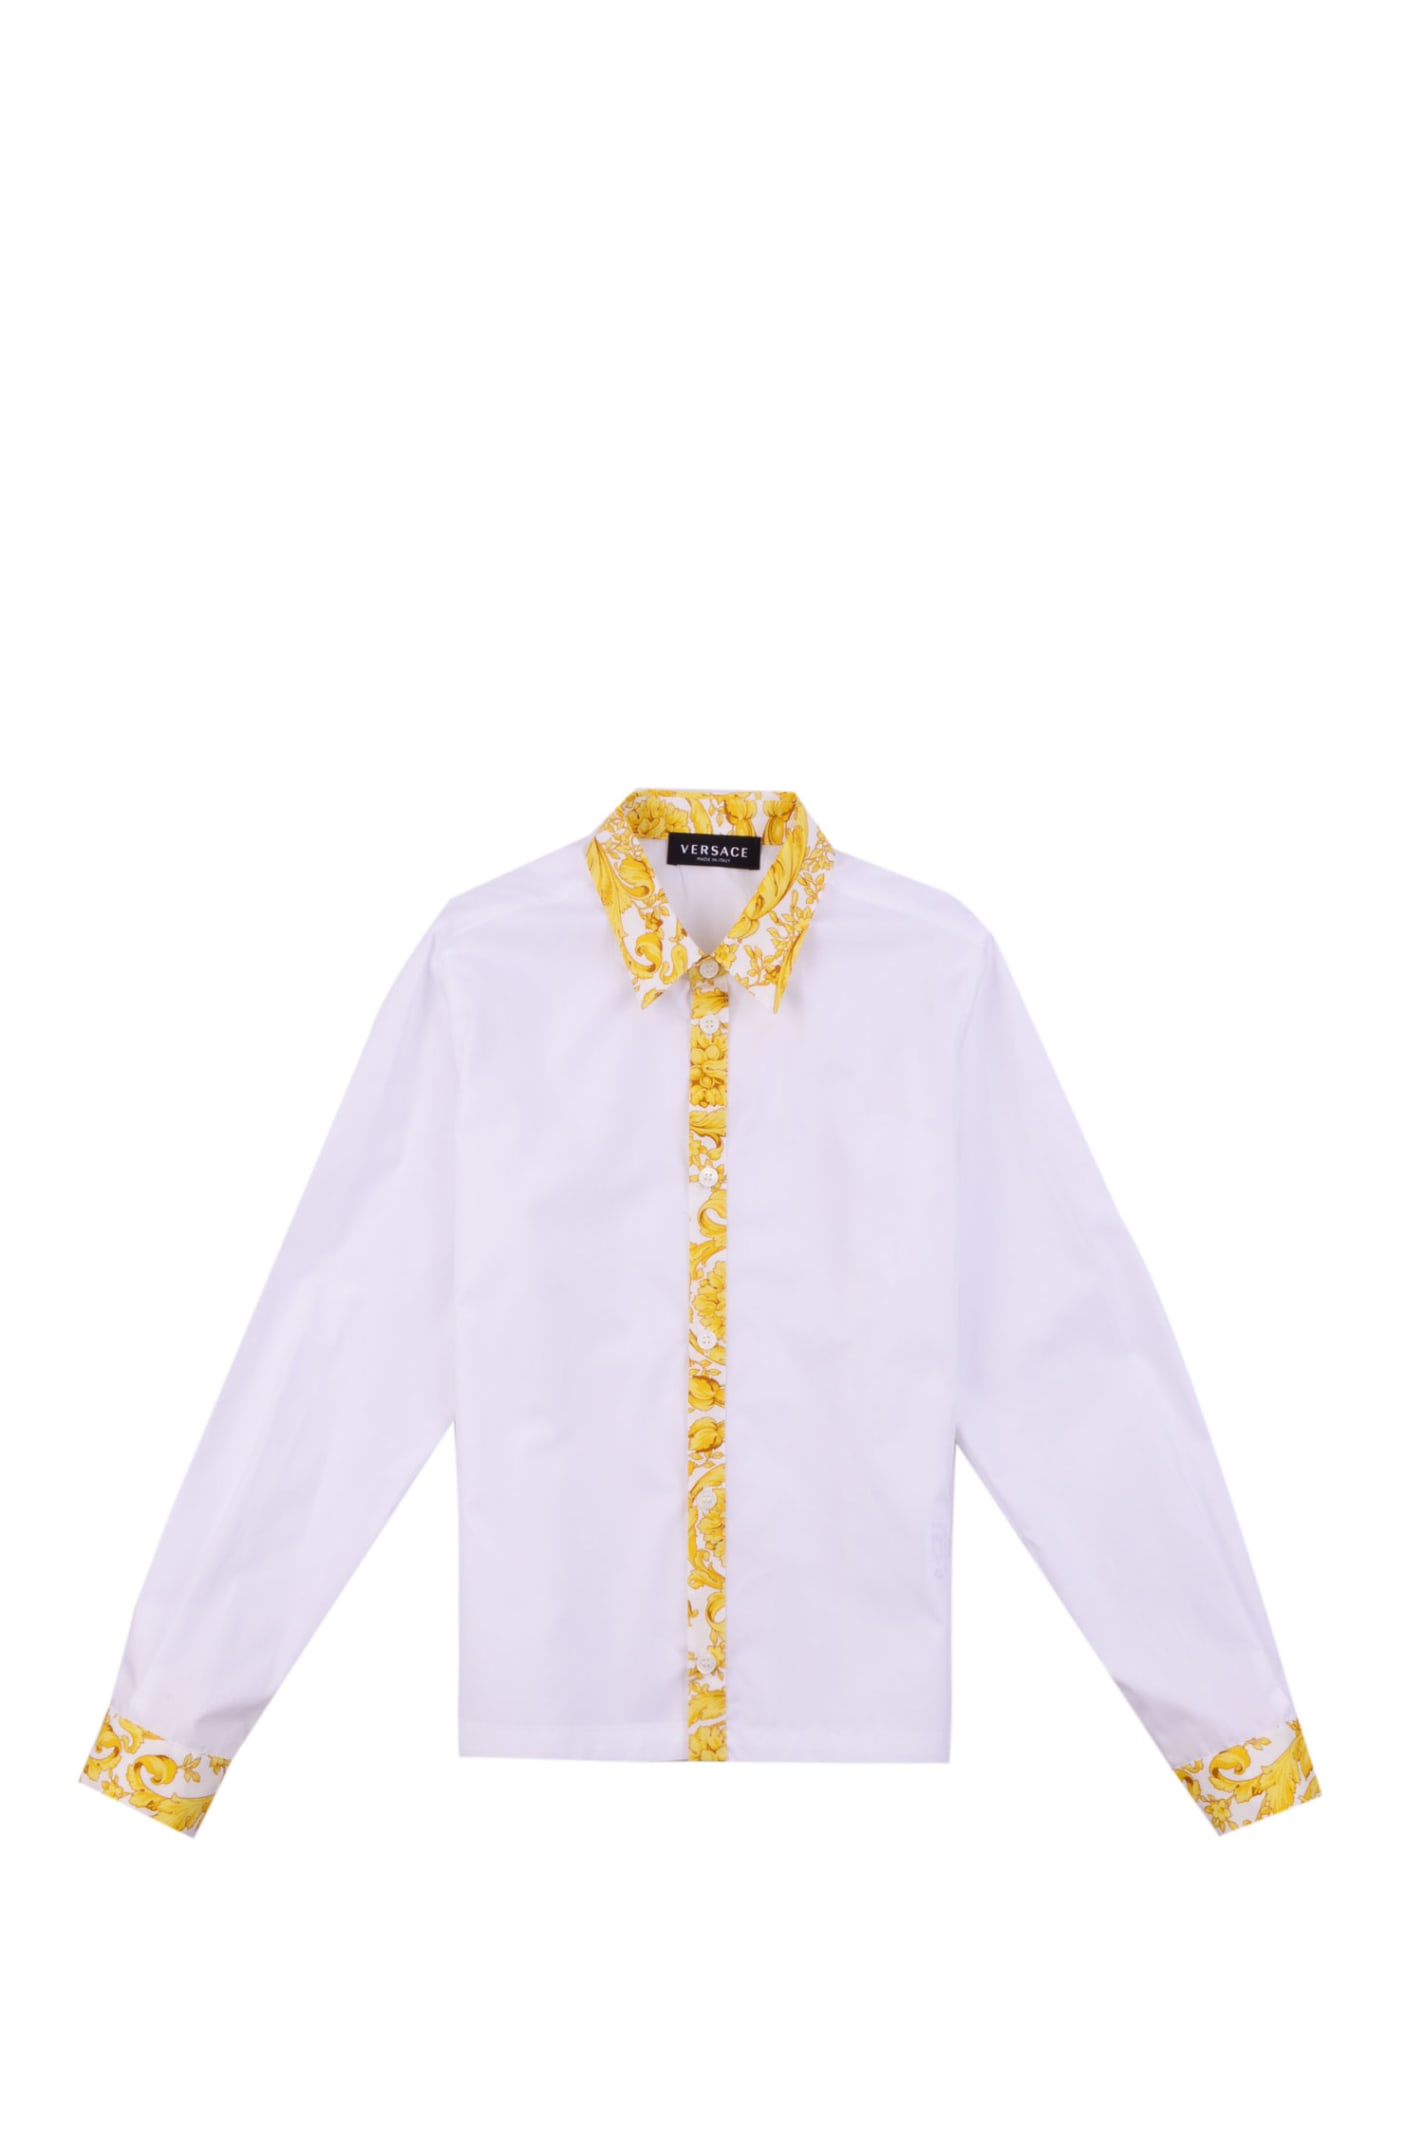 Versace Shirt With Baroque Print